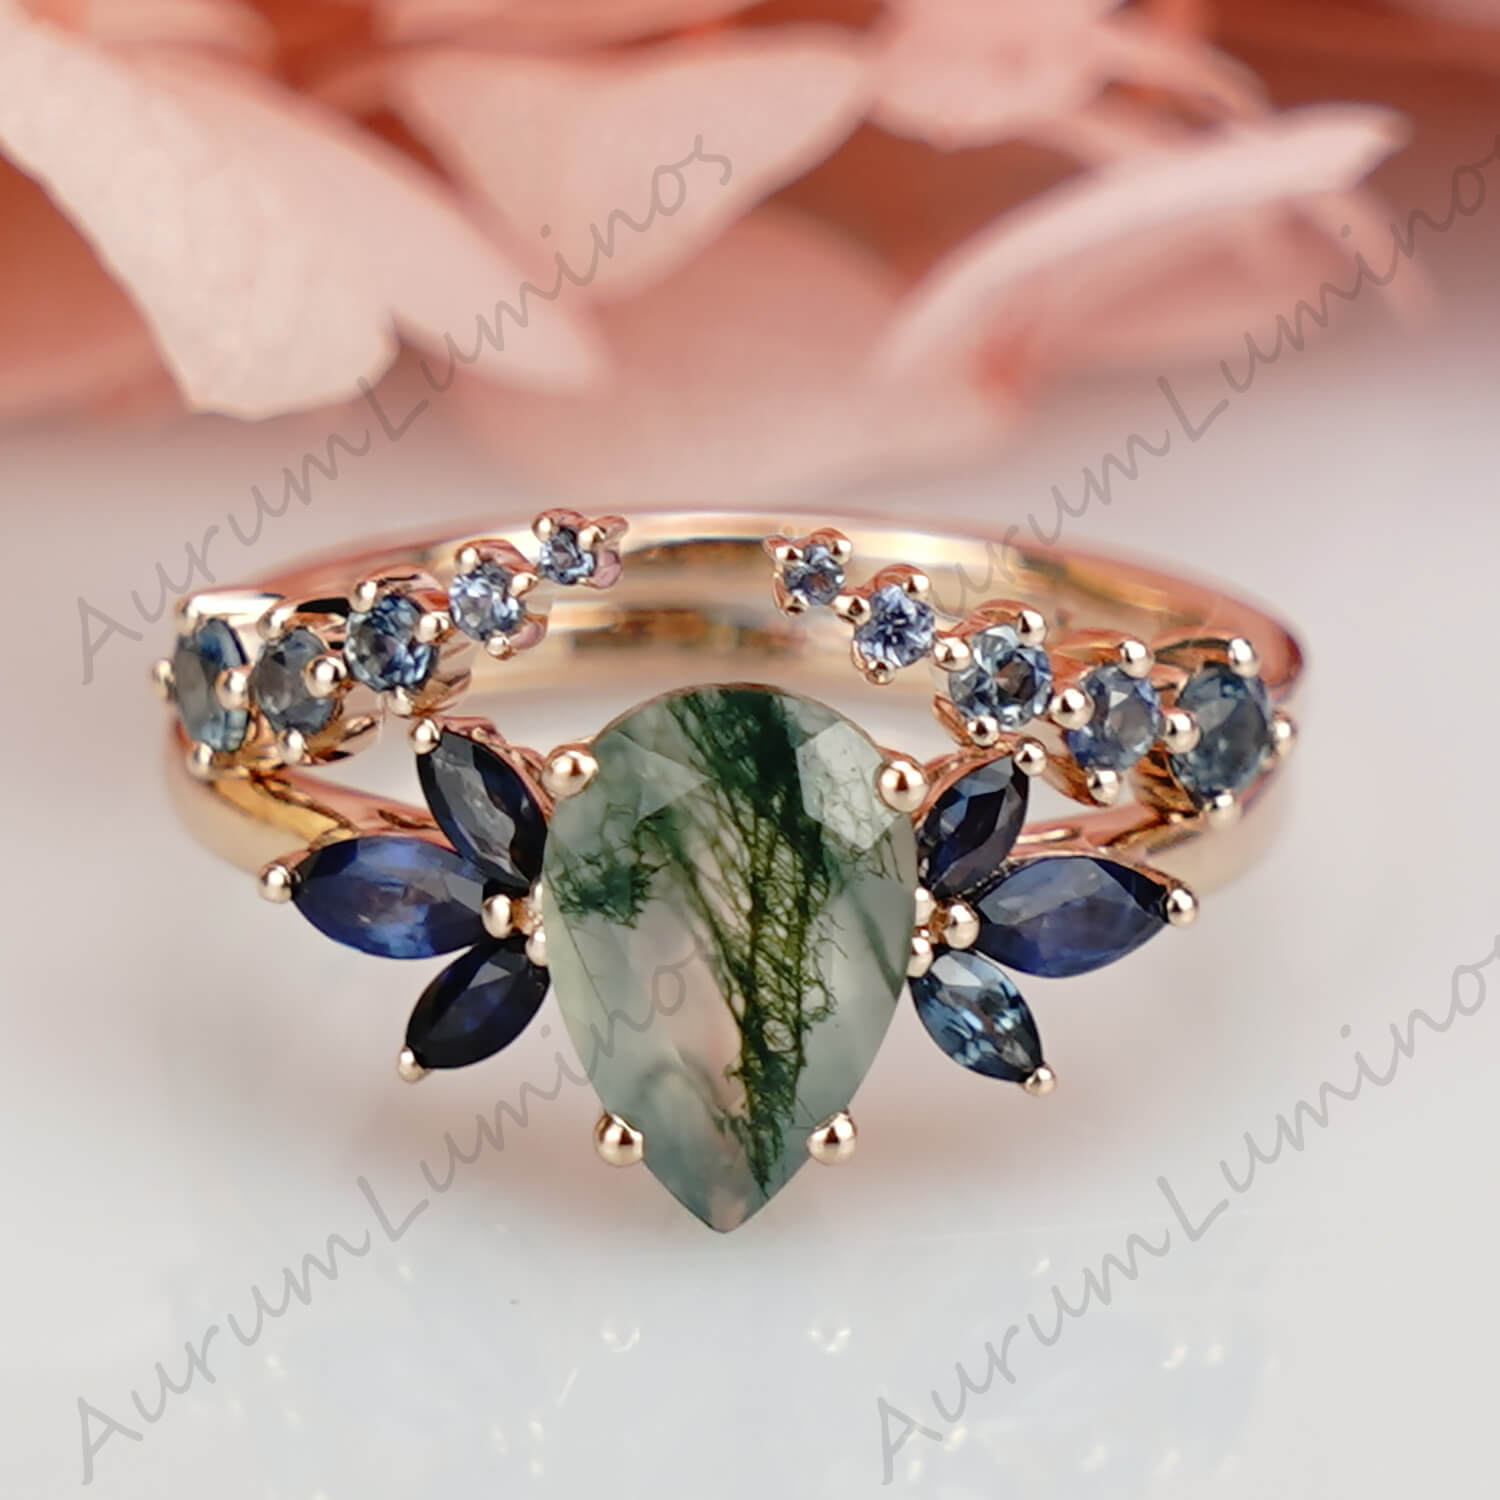 1.3CT Pear Cut Moss Agate Engagement Ring Set Women Floral Rings,Halo ring for women, flower ring, anniversary gift